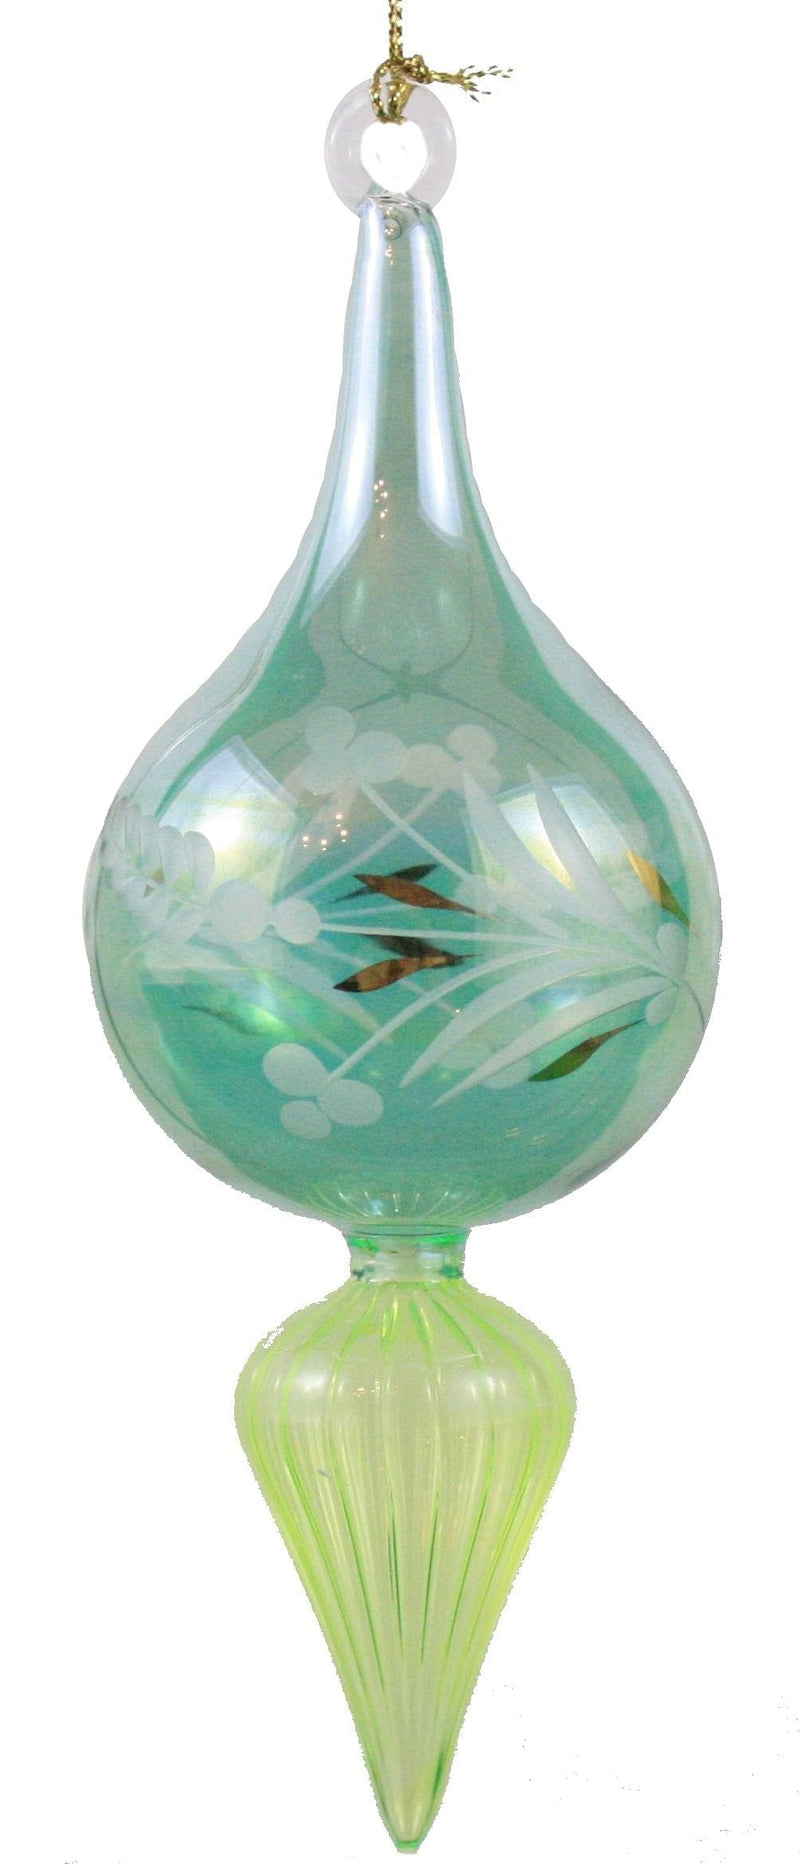 Mid Size Crystal 2 Section Spire with Gold Etching Ornament -  Green - Shelburne Country Store